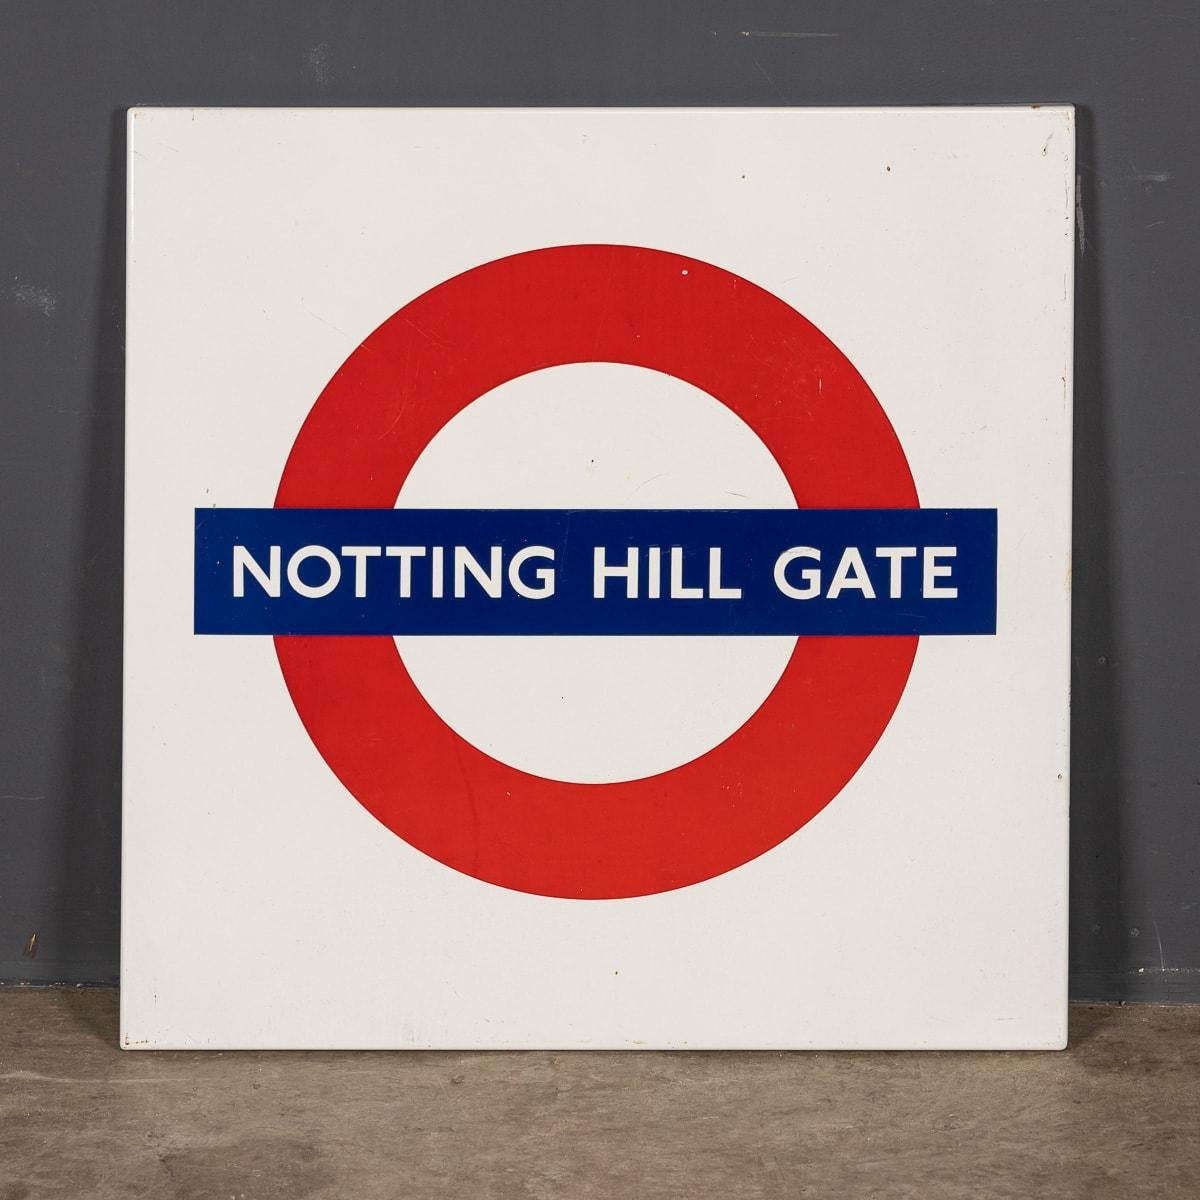 A superb 20th Century enamelled London Underground station sign from Notting Hill Gate. Created in the 1970's, this sign would have been displayed on the station platform informing arriving passengers of which station the London underground train is